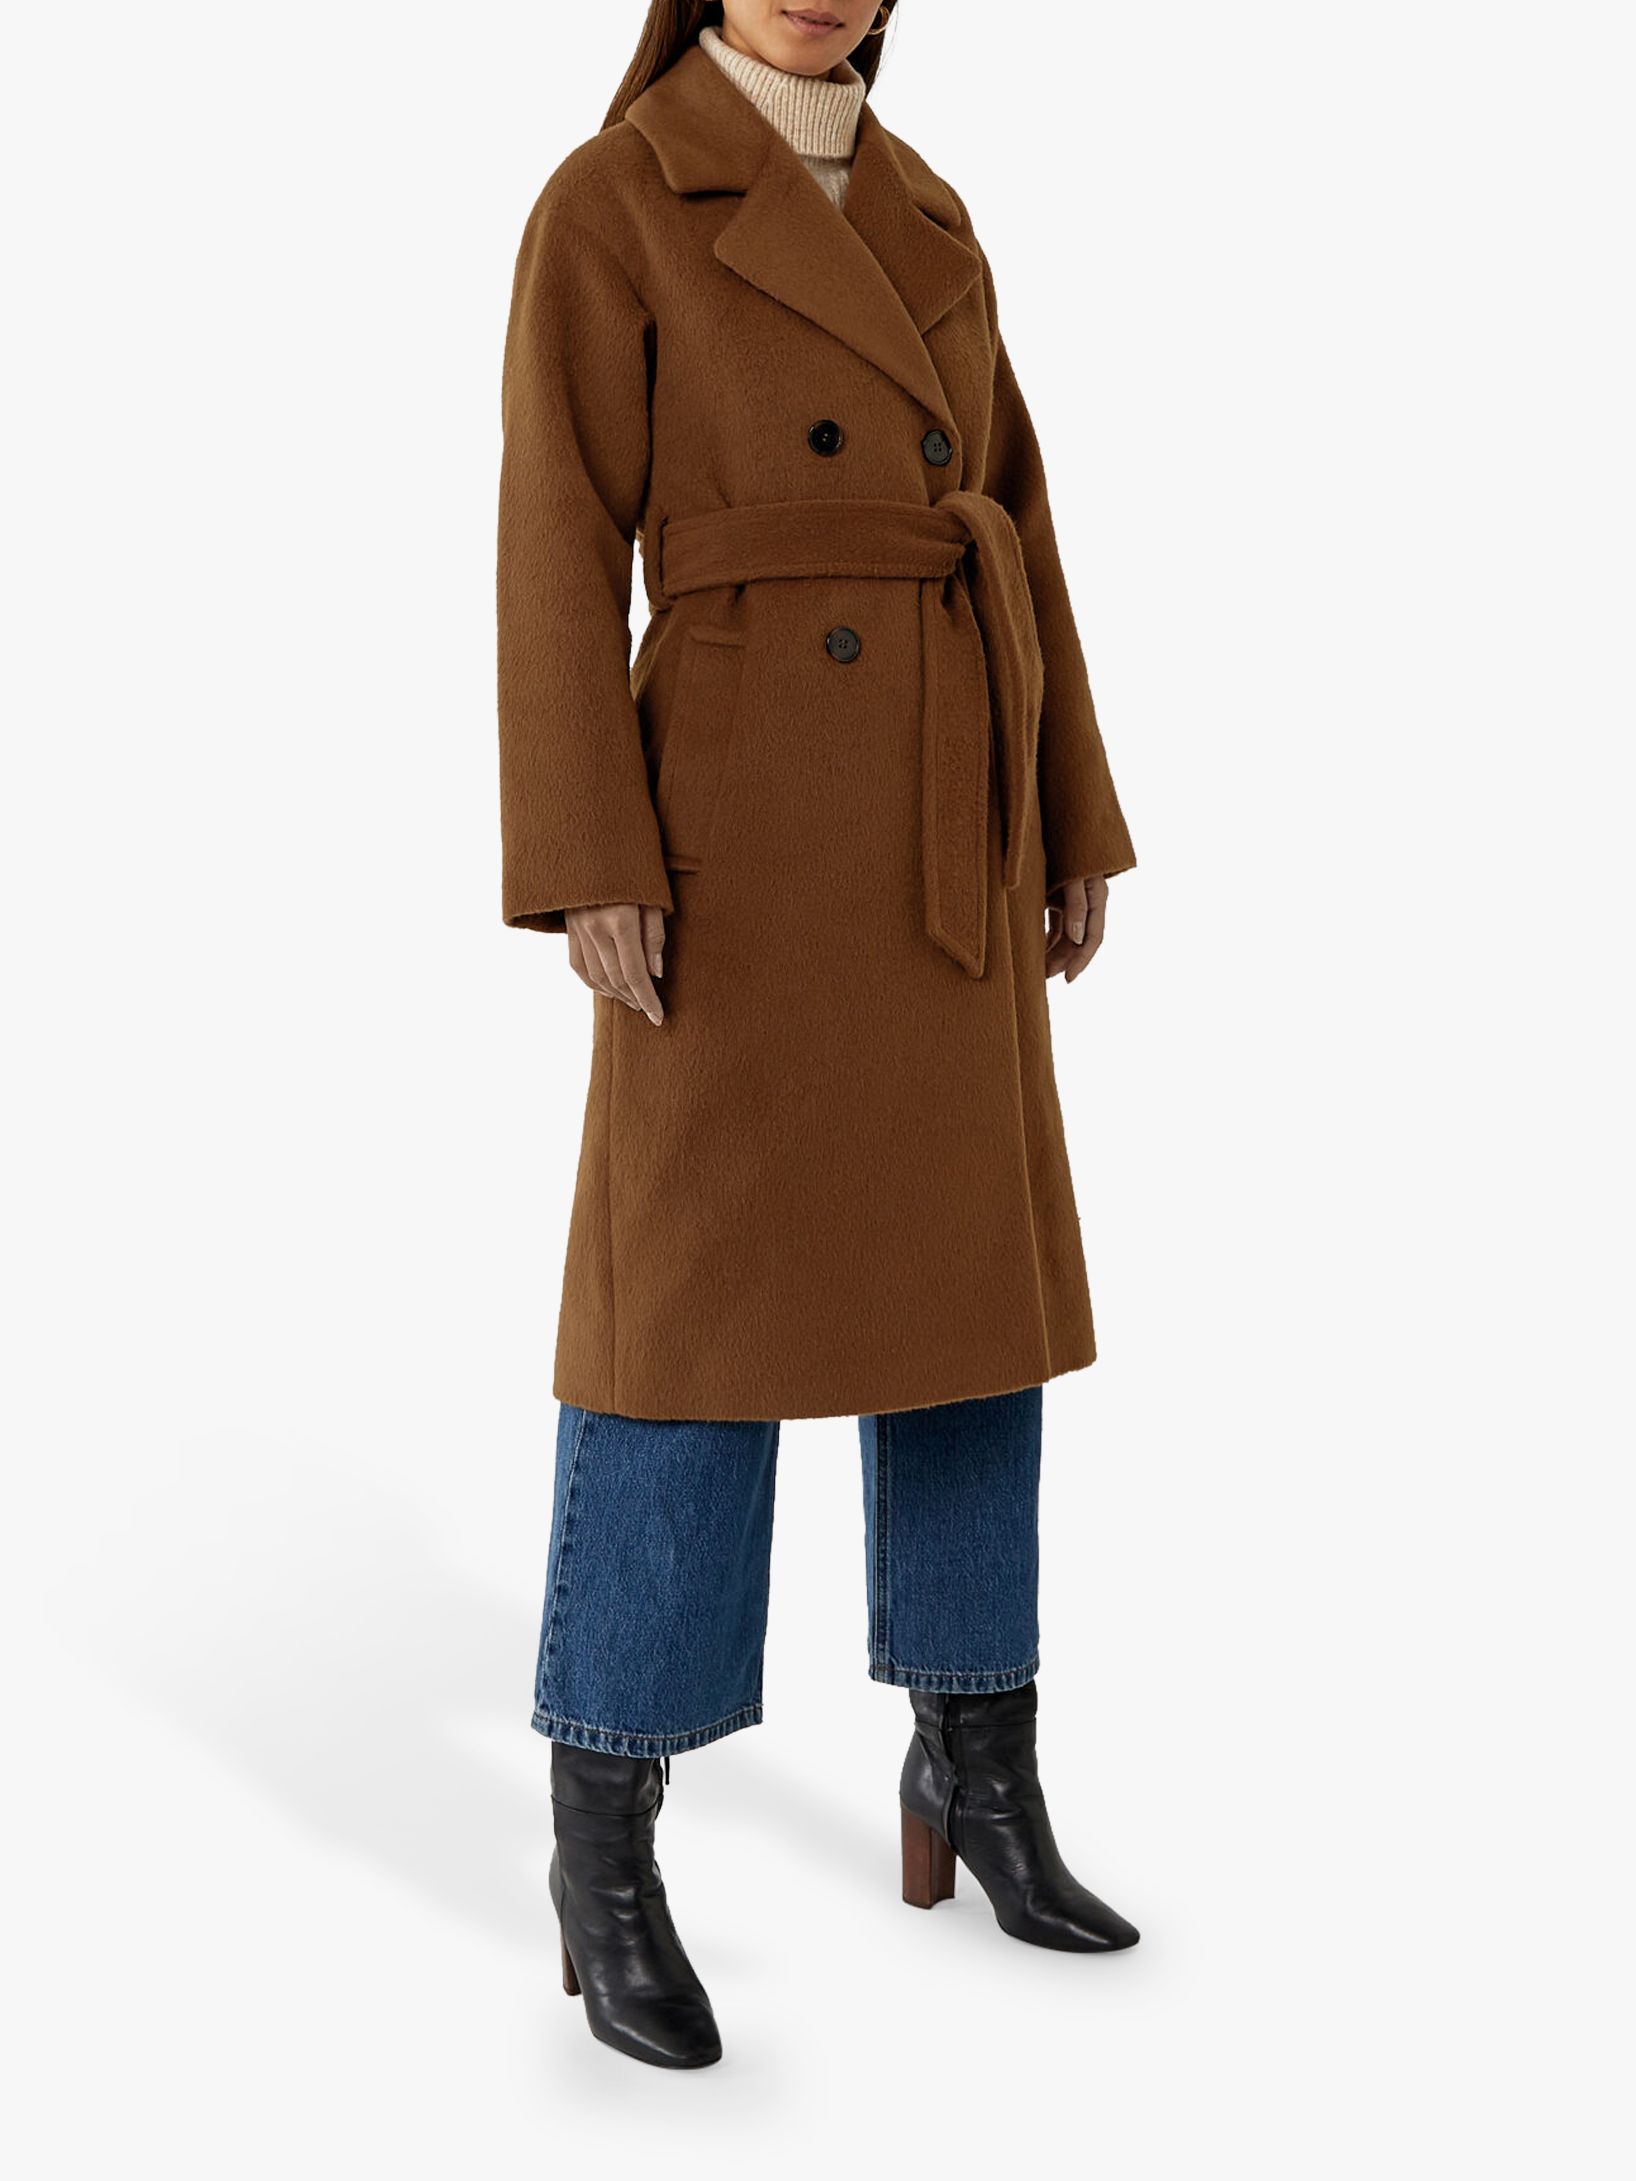 Warehouse Textured Double-Breasted Belted Wrap Coat, Tan